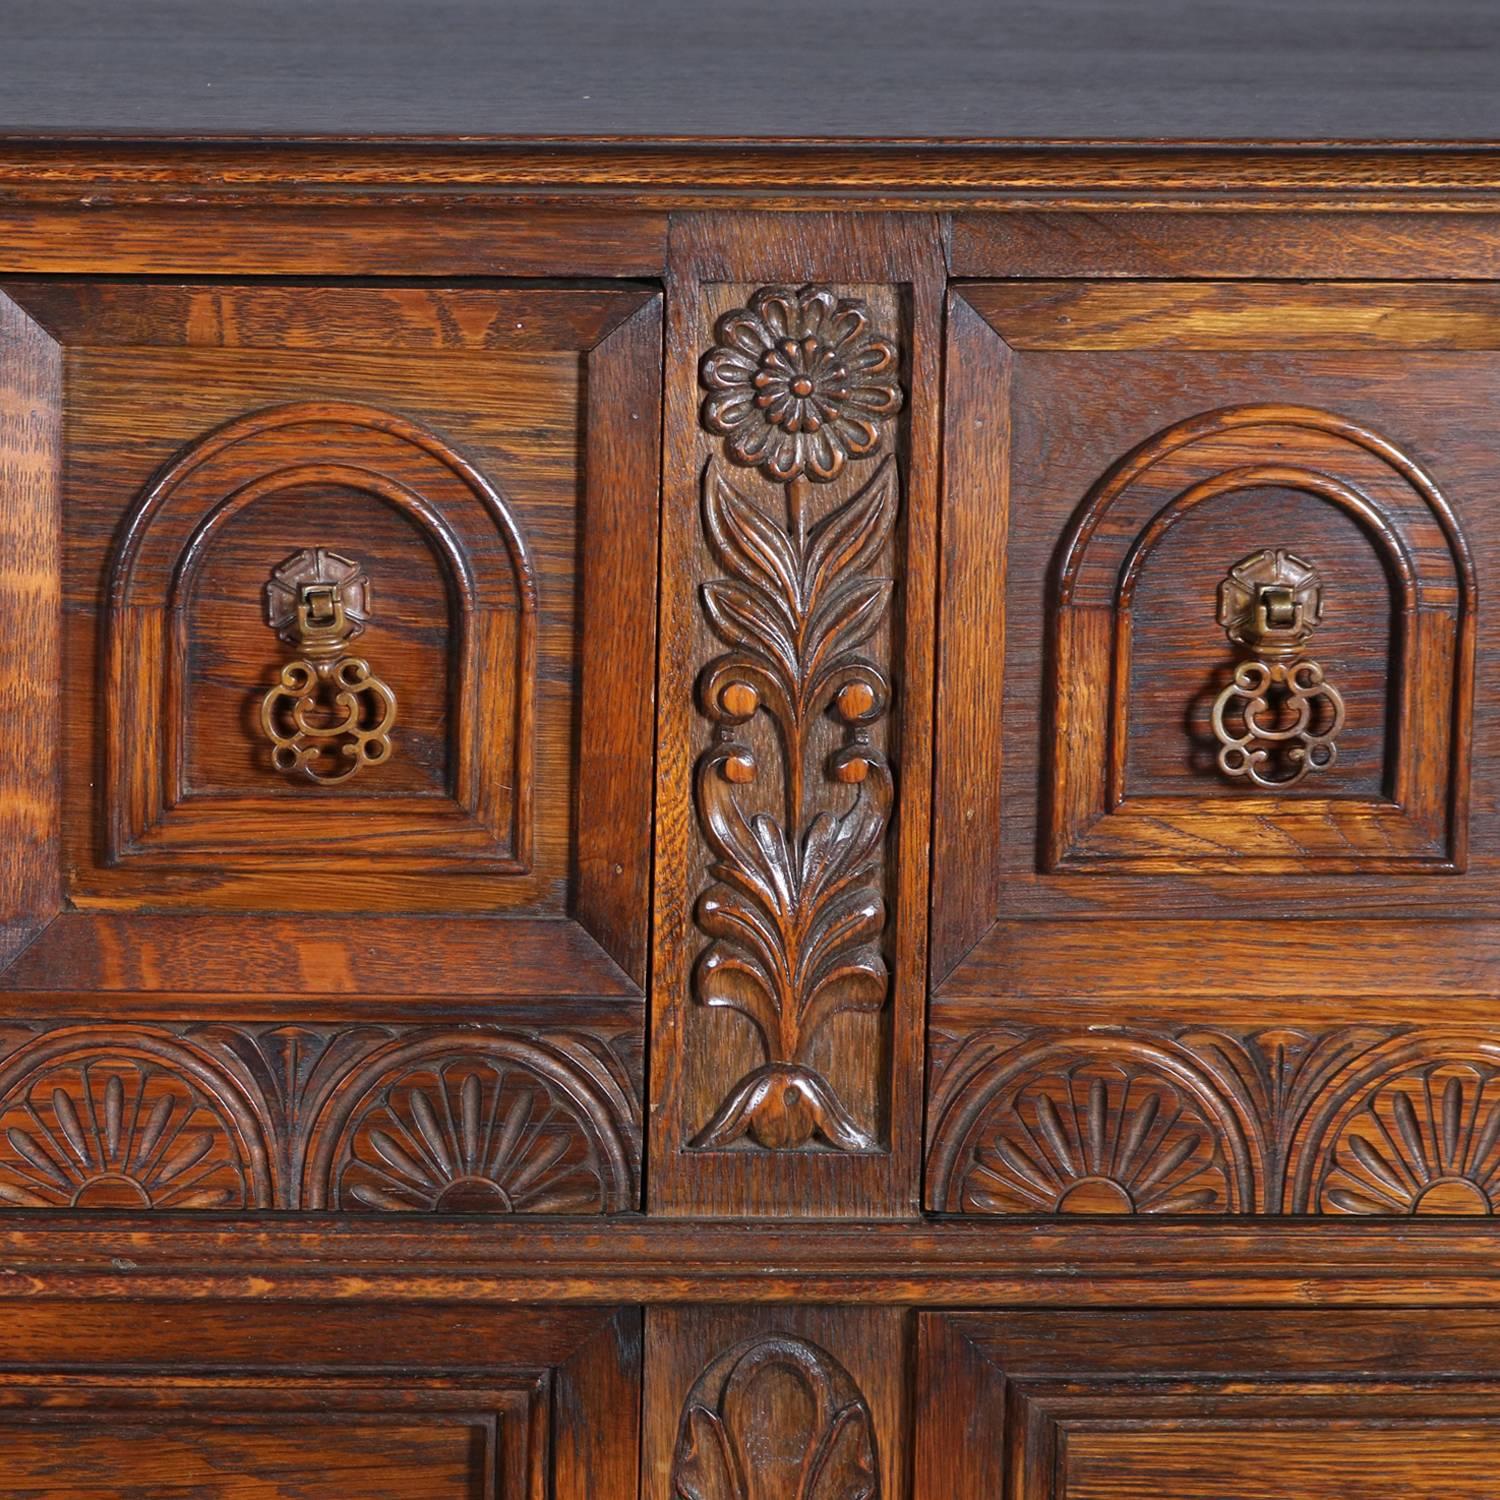 American Antique Edwardian Jacobean Style Carved Oak Sideboard by Kittinger, circa 1920